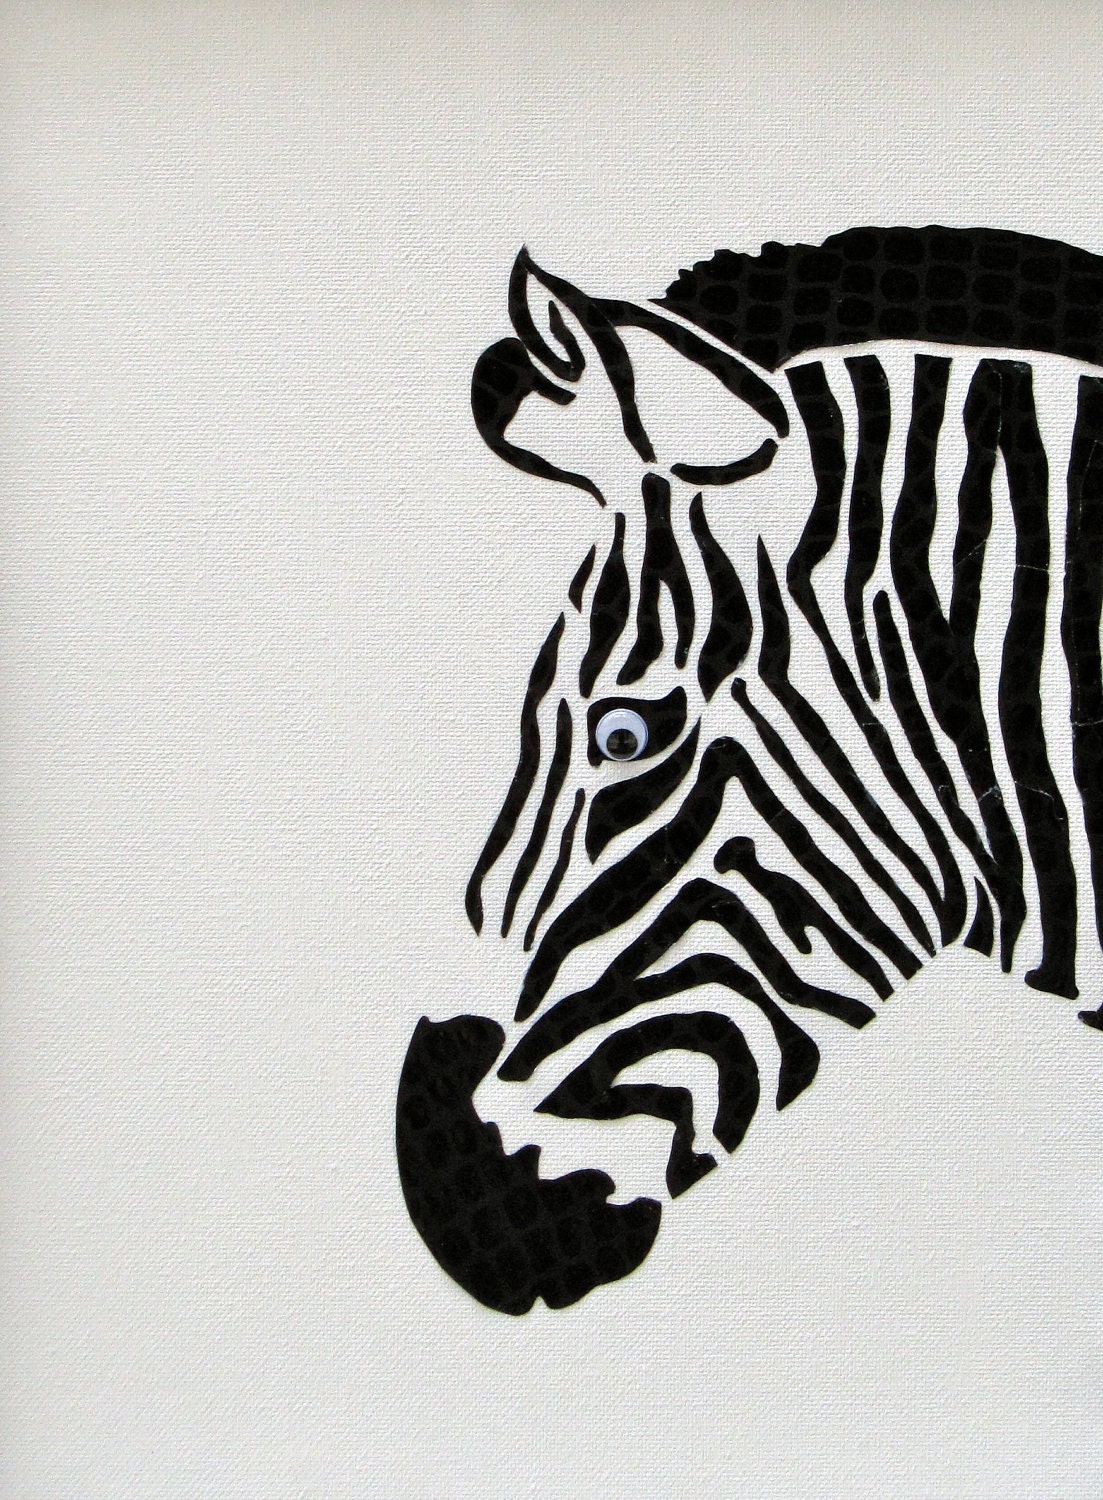 Black and White Beauty - Original Handmade Acrylic Paint and Paper Painting on Canvas - PaperAndPaintRocks